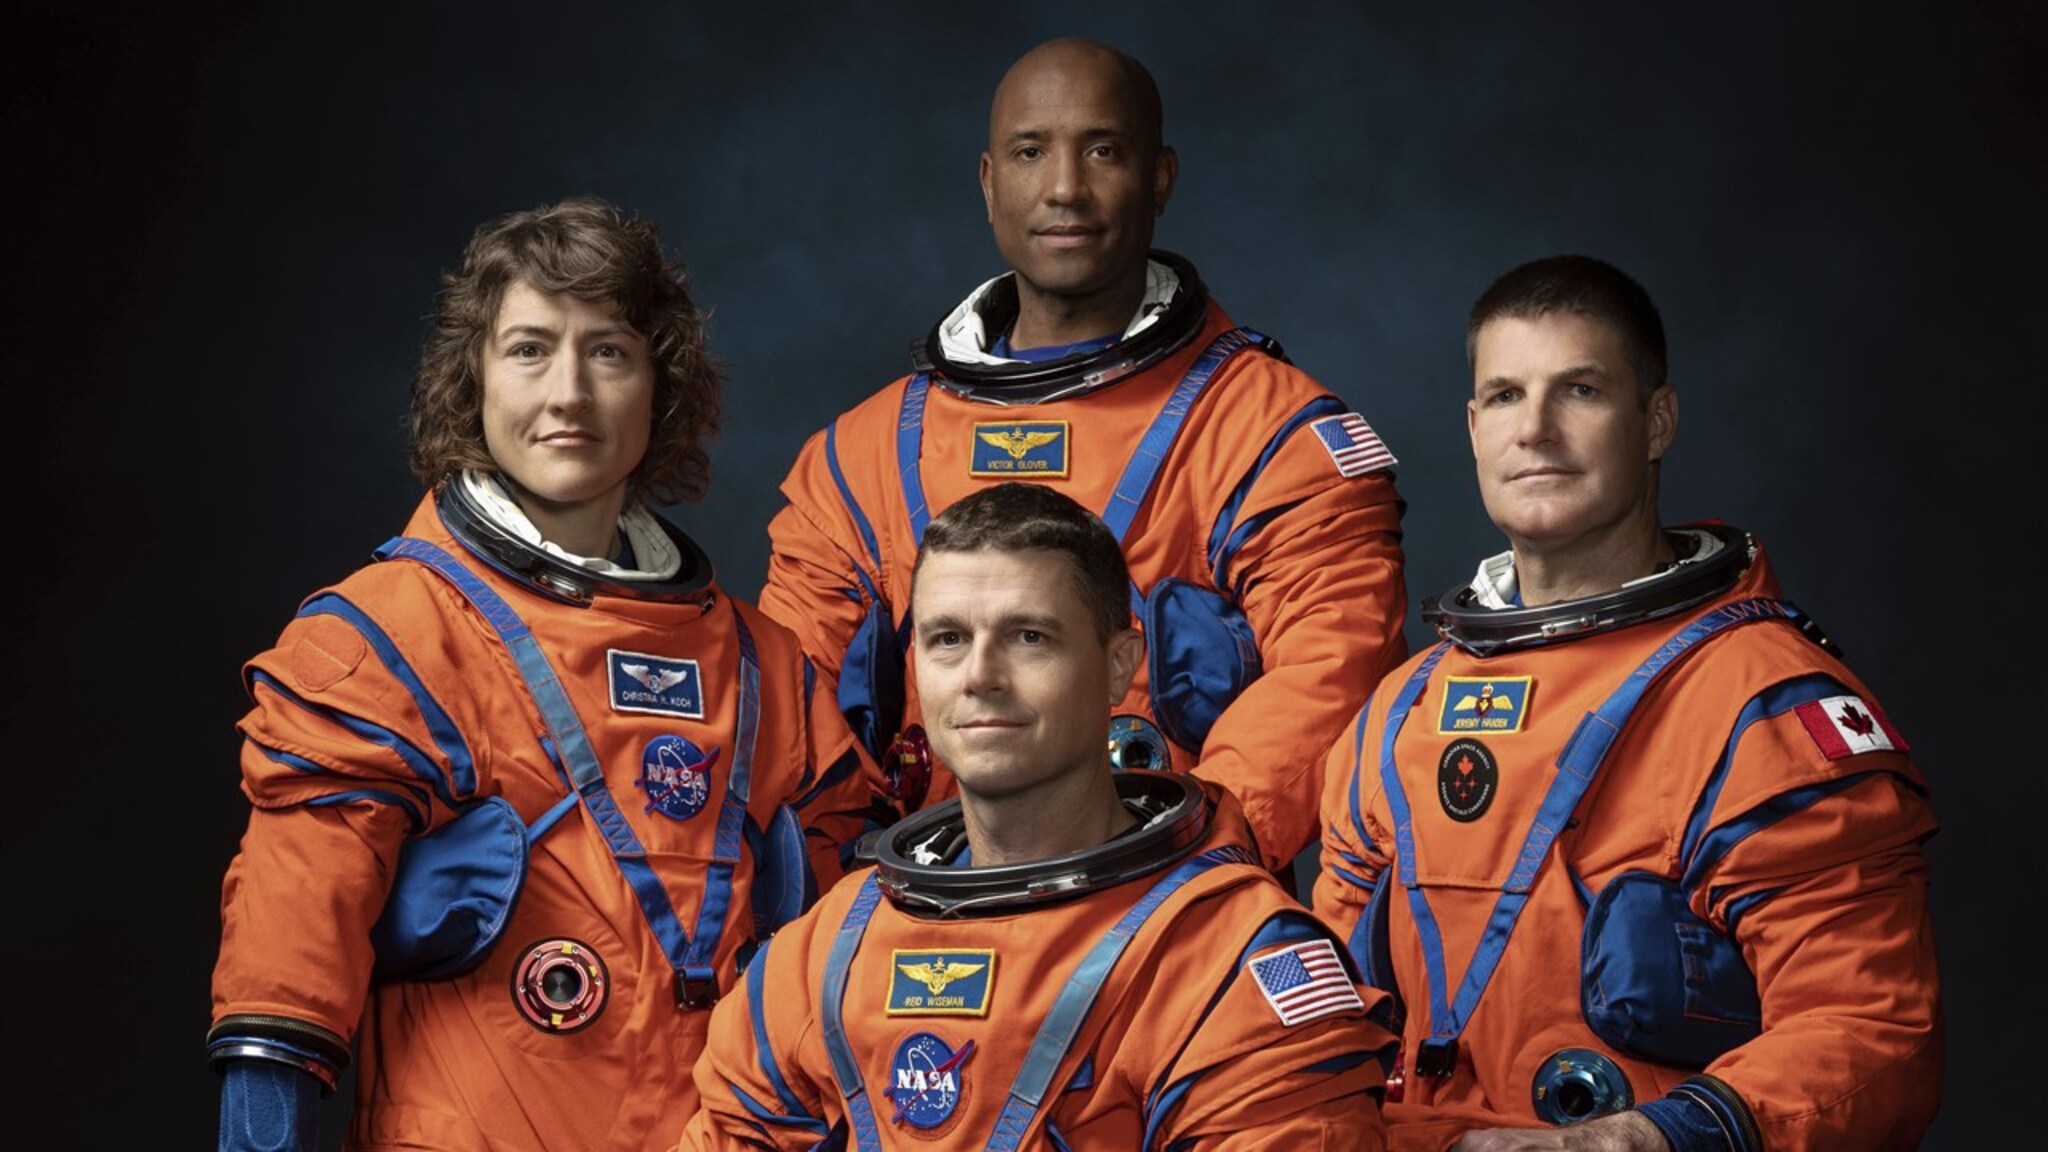 These are the four astronauts who will fly around the moon